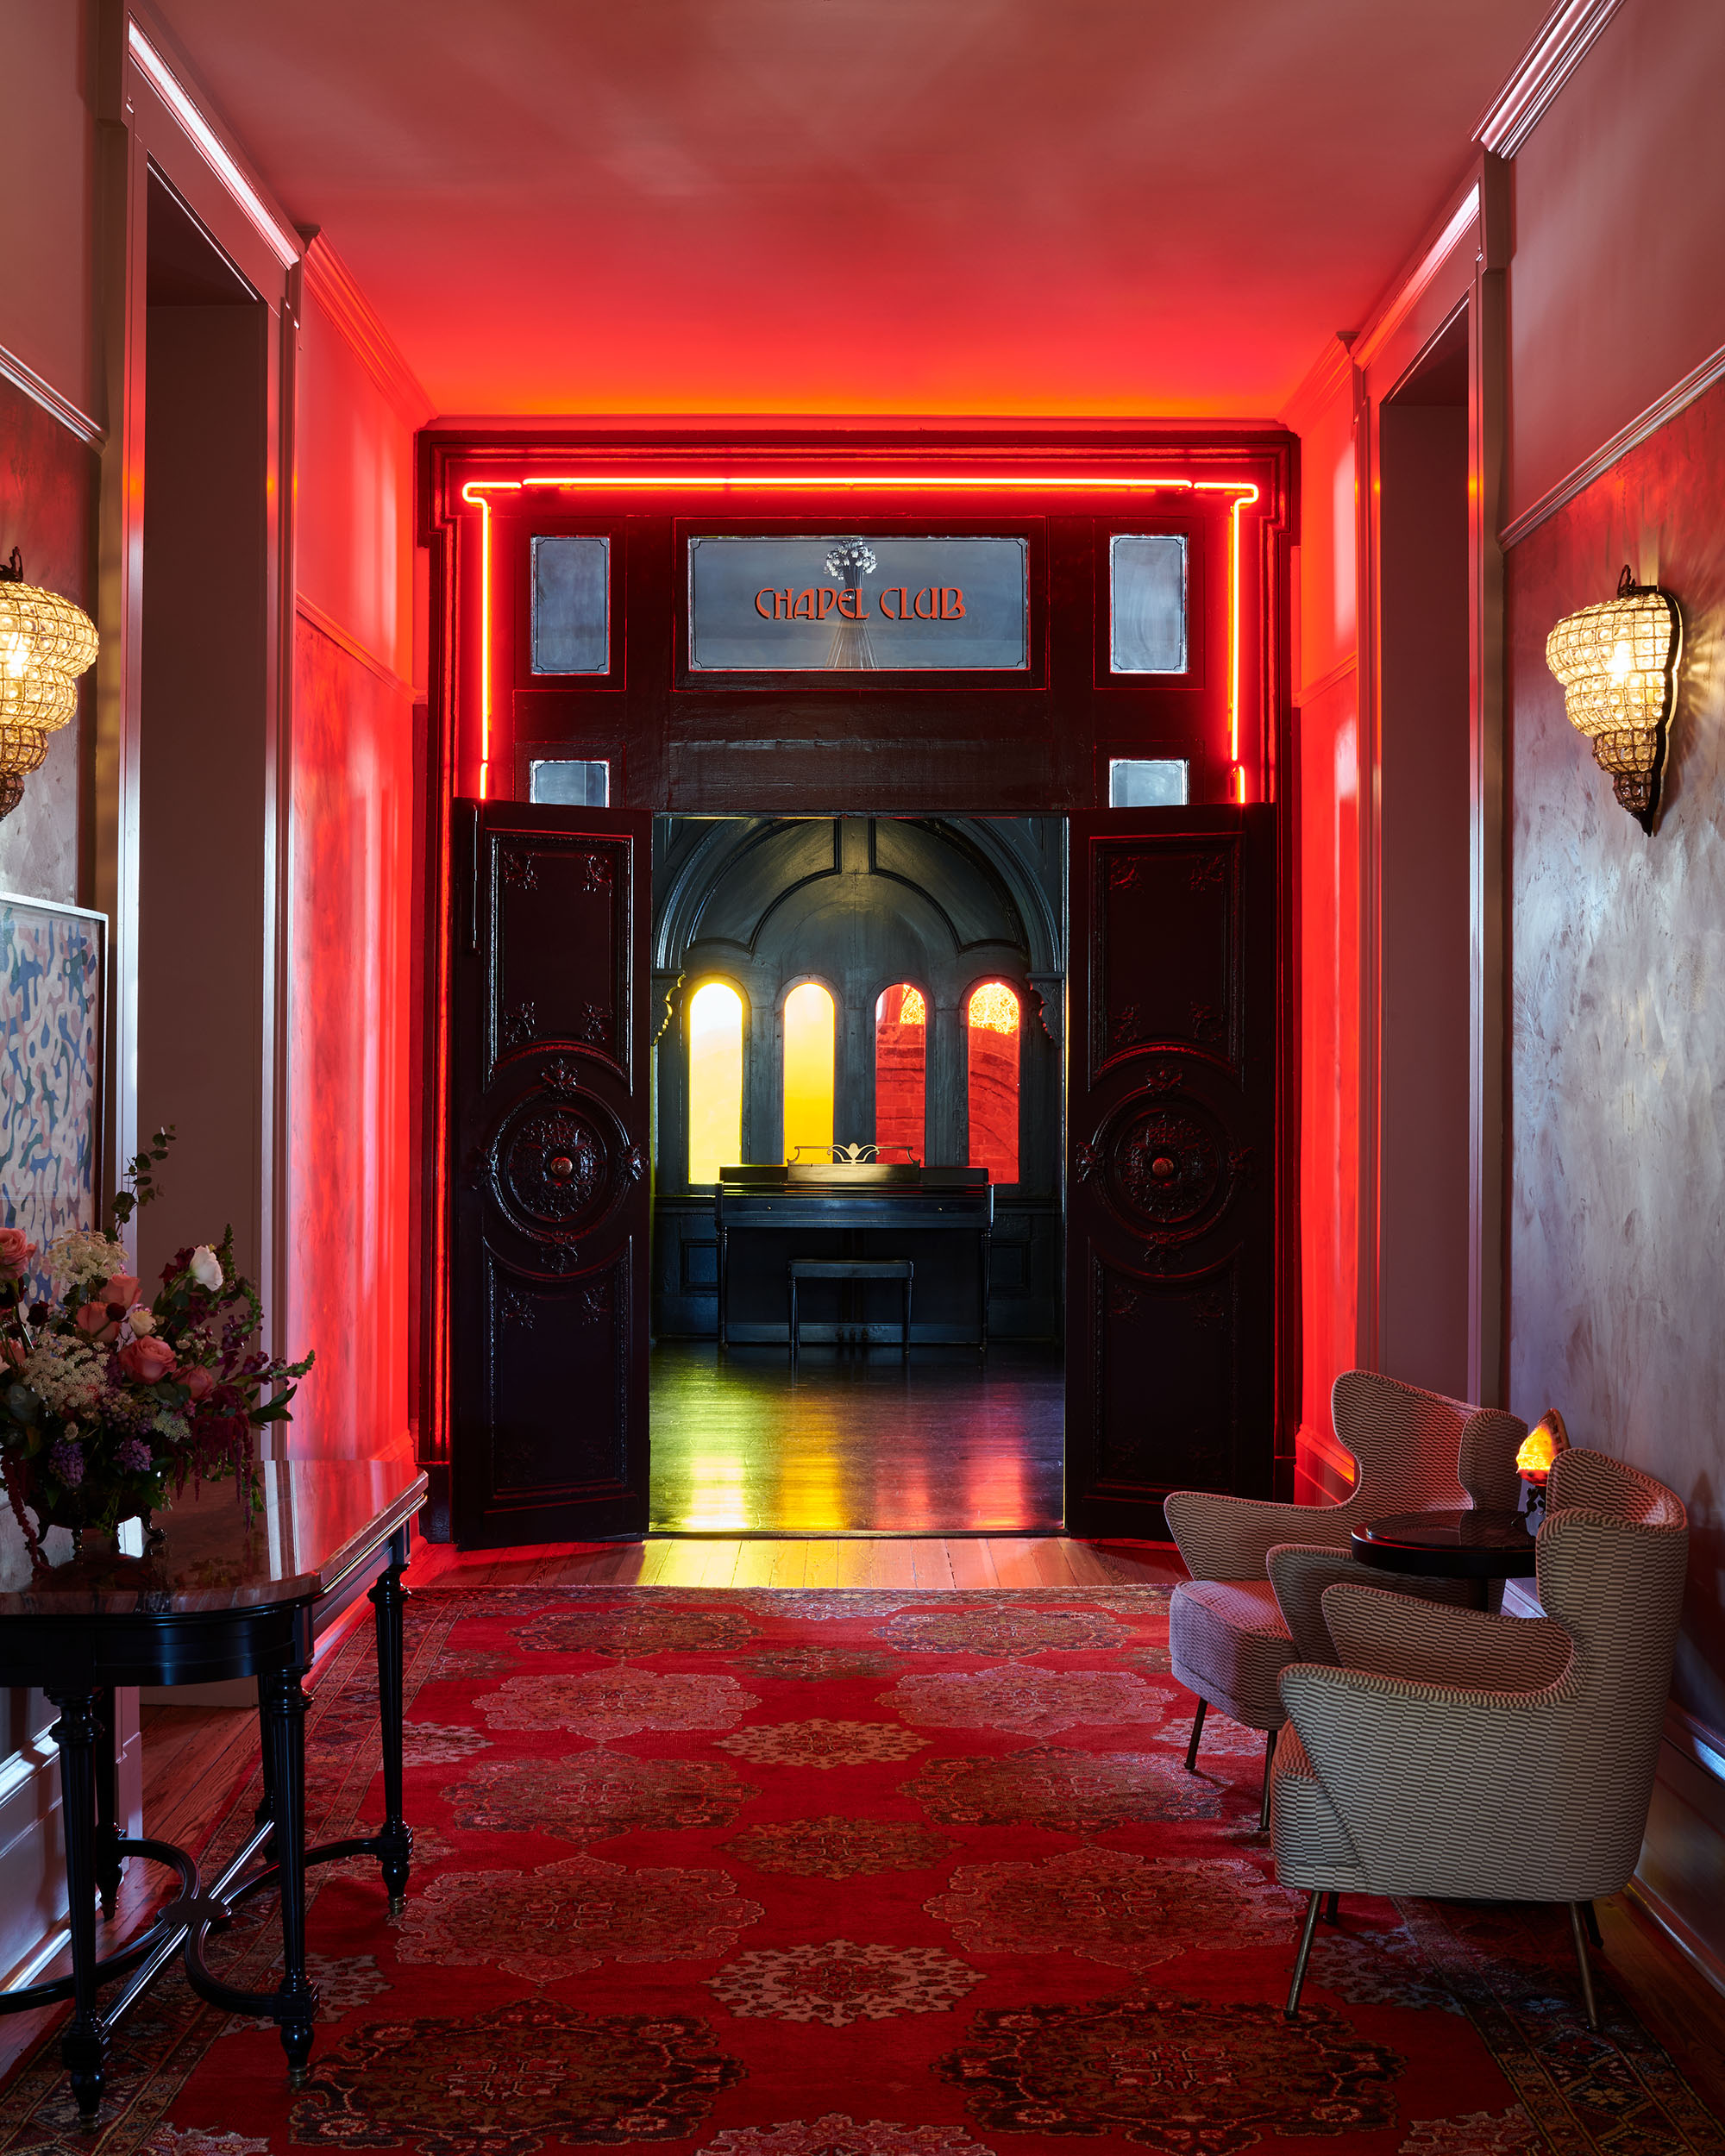 Chapel Club entrance in Hotel St.Vincent in New Orleans by Alison Gootee photography